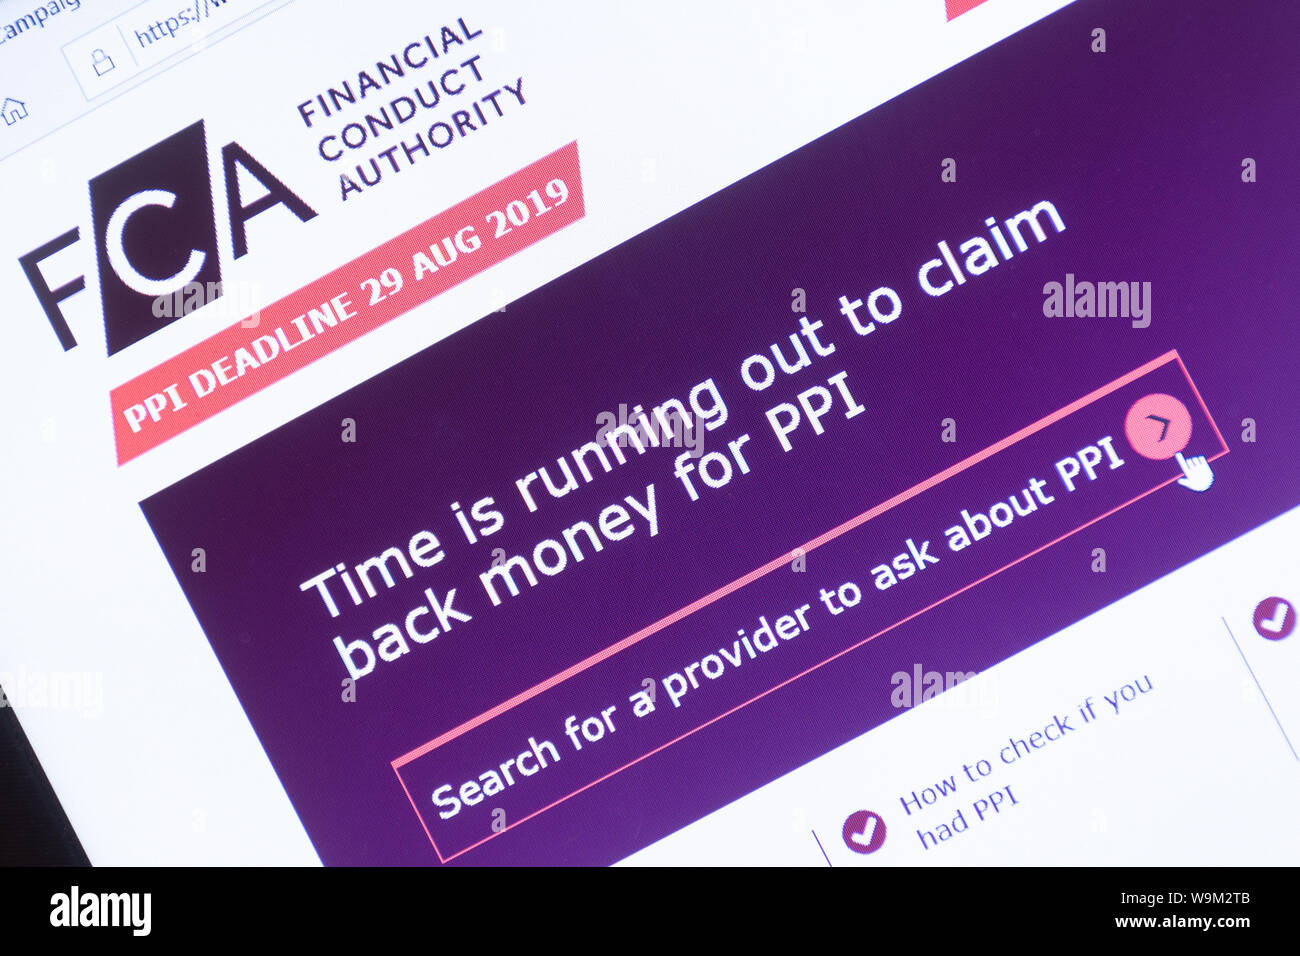 PPI claim deadline 29 August 2019 on the FCA (Financial Conduct Authority) website displayed on a laptop screen screenshot, UK. Stock Photo